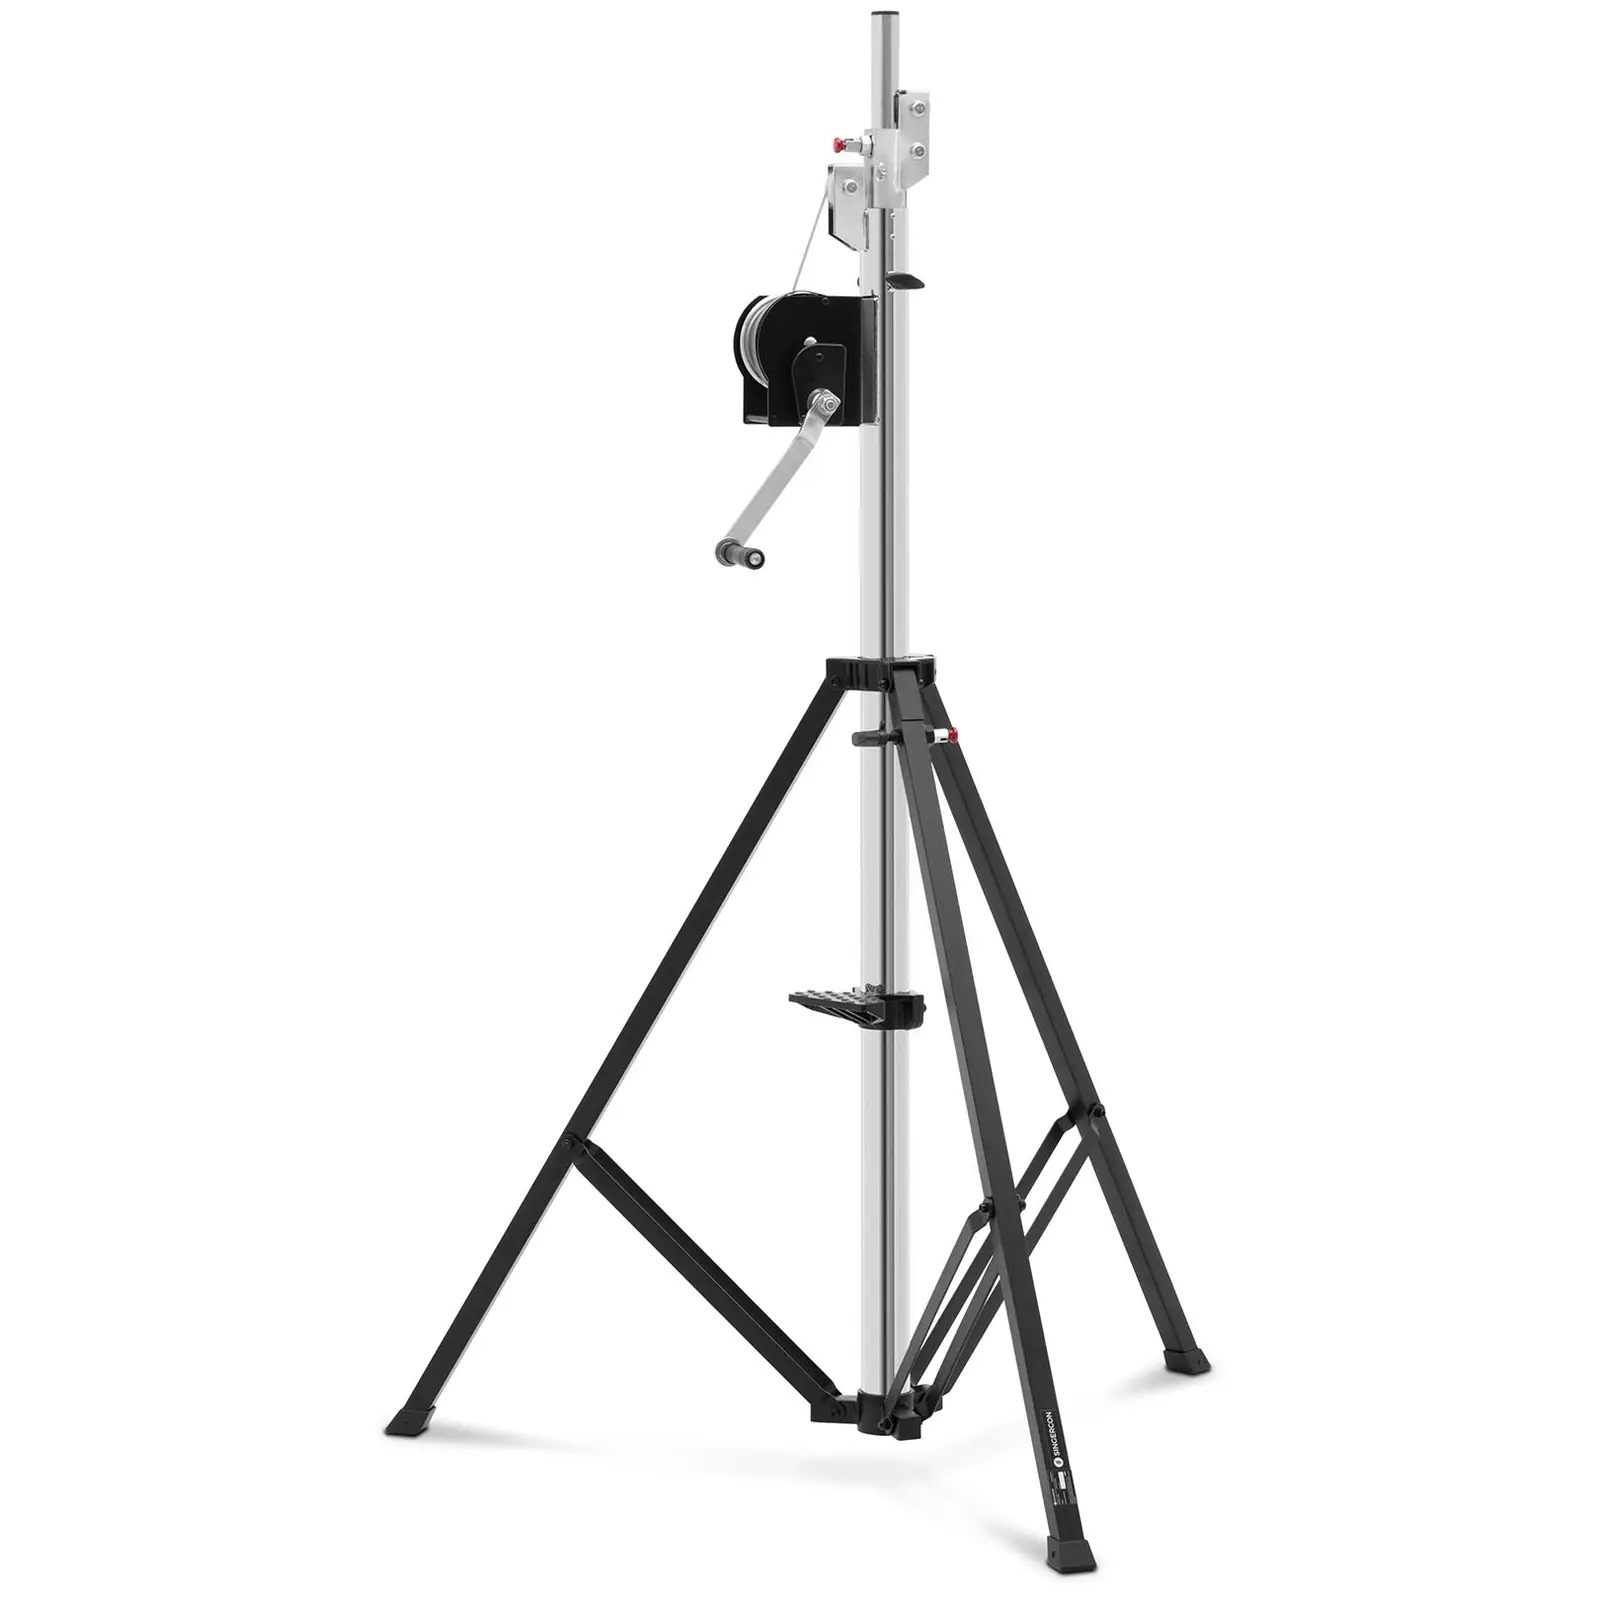 Factory second Light Stand - up to 80 kg - 1.65 - 4.1 m